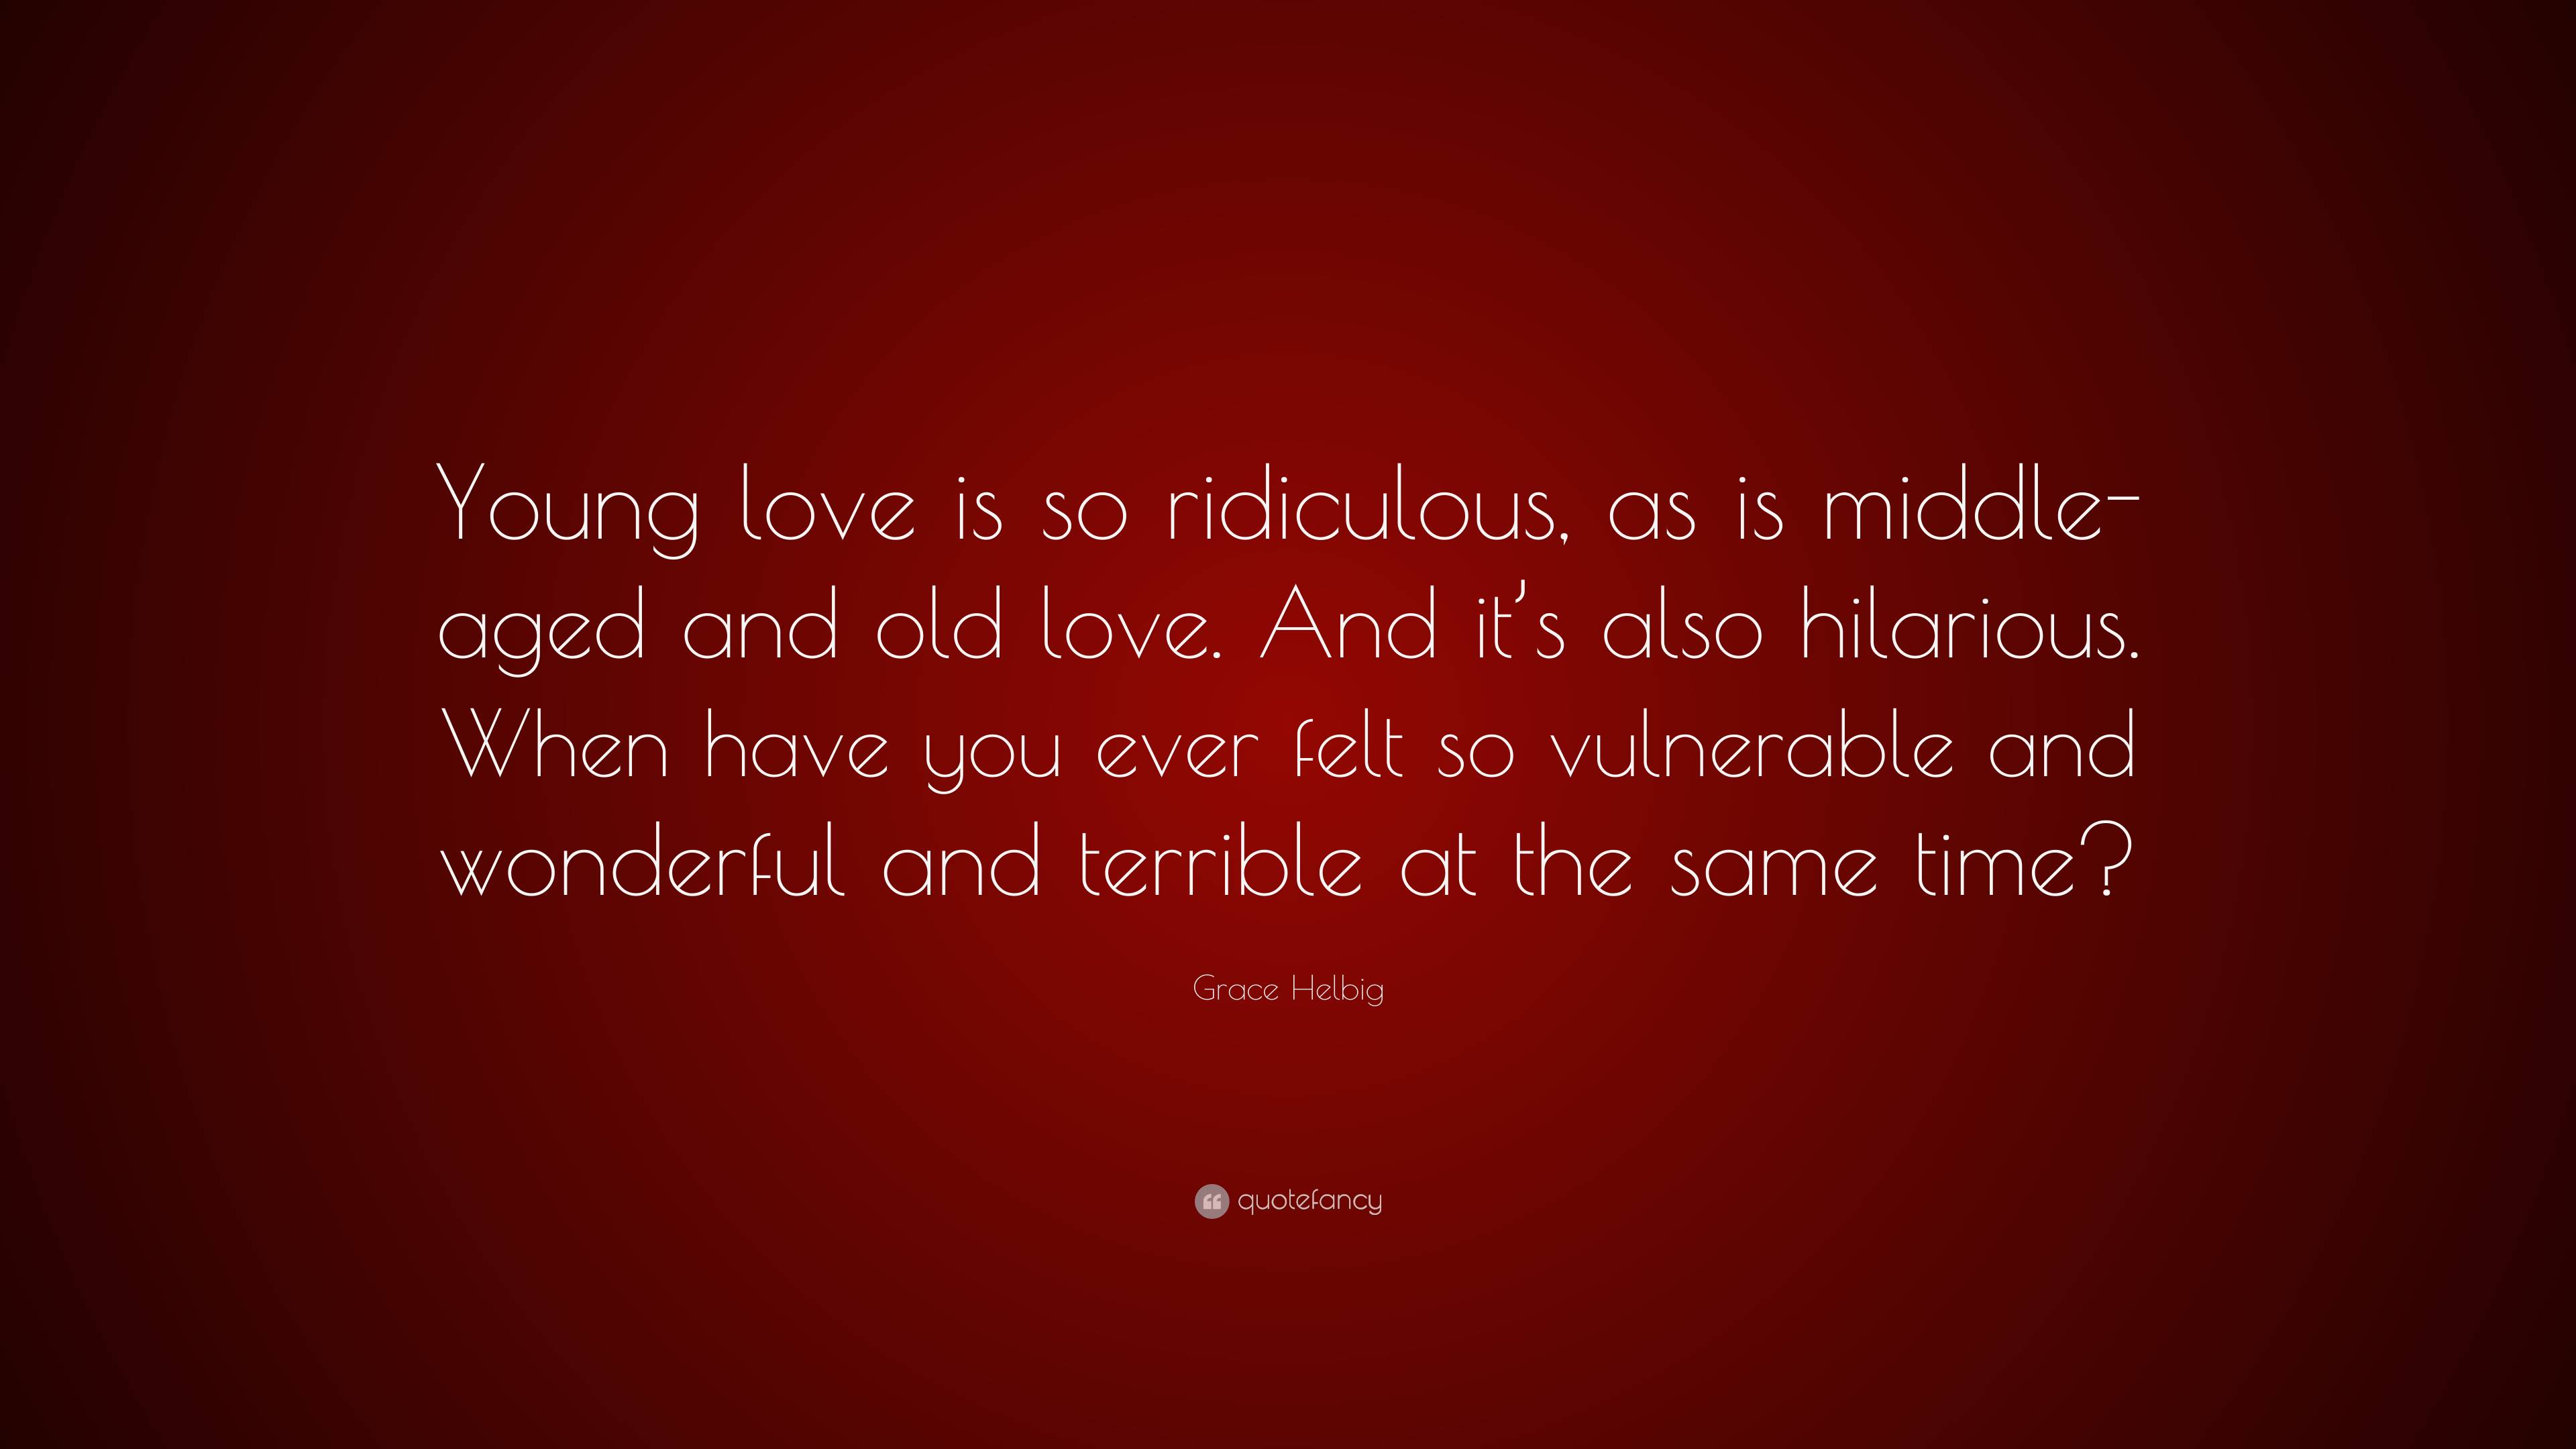 Grace Helbig Quote: “Young love is so ridiculous, as is middle-aged and ...